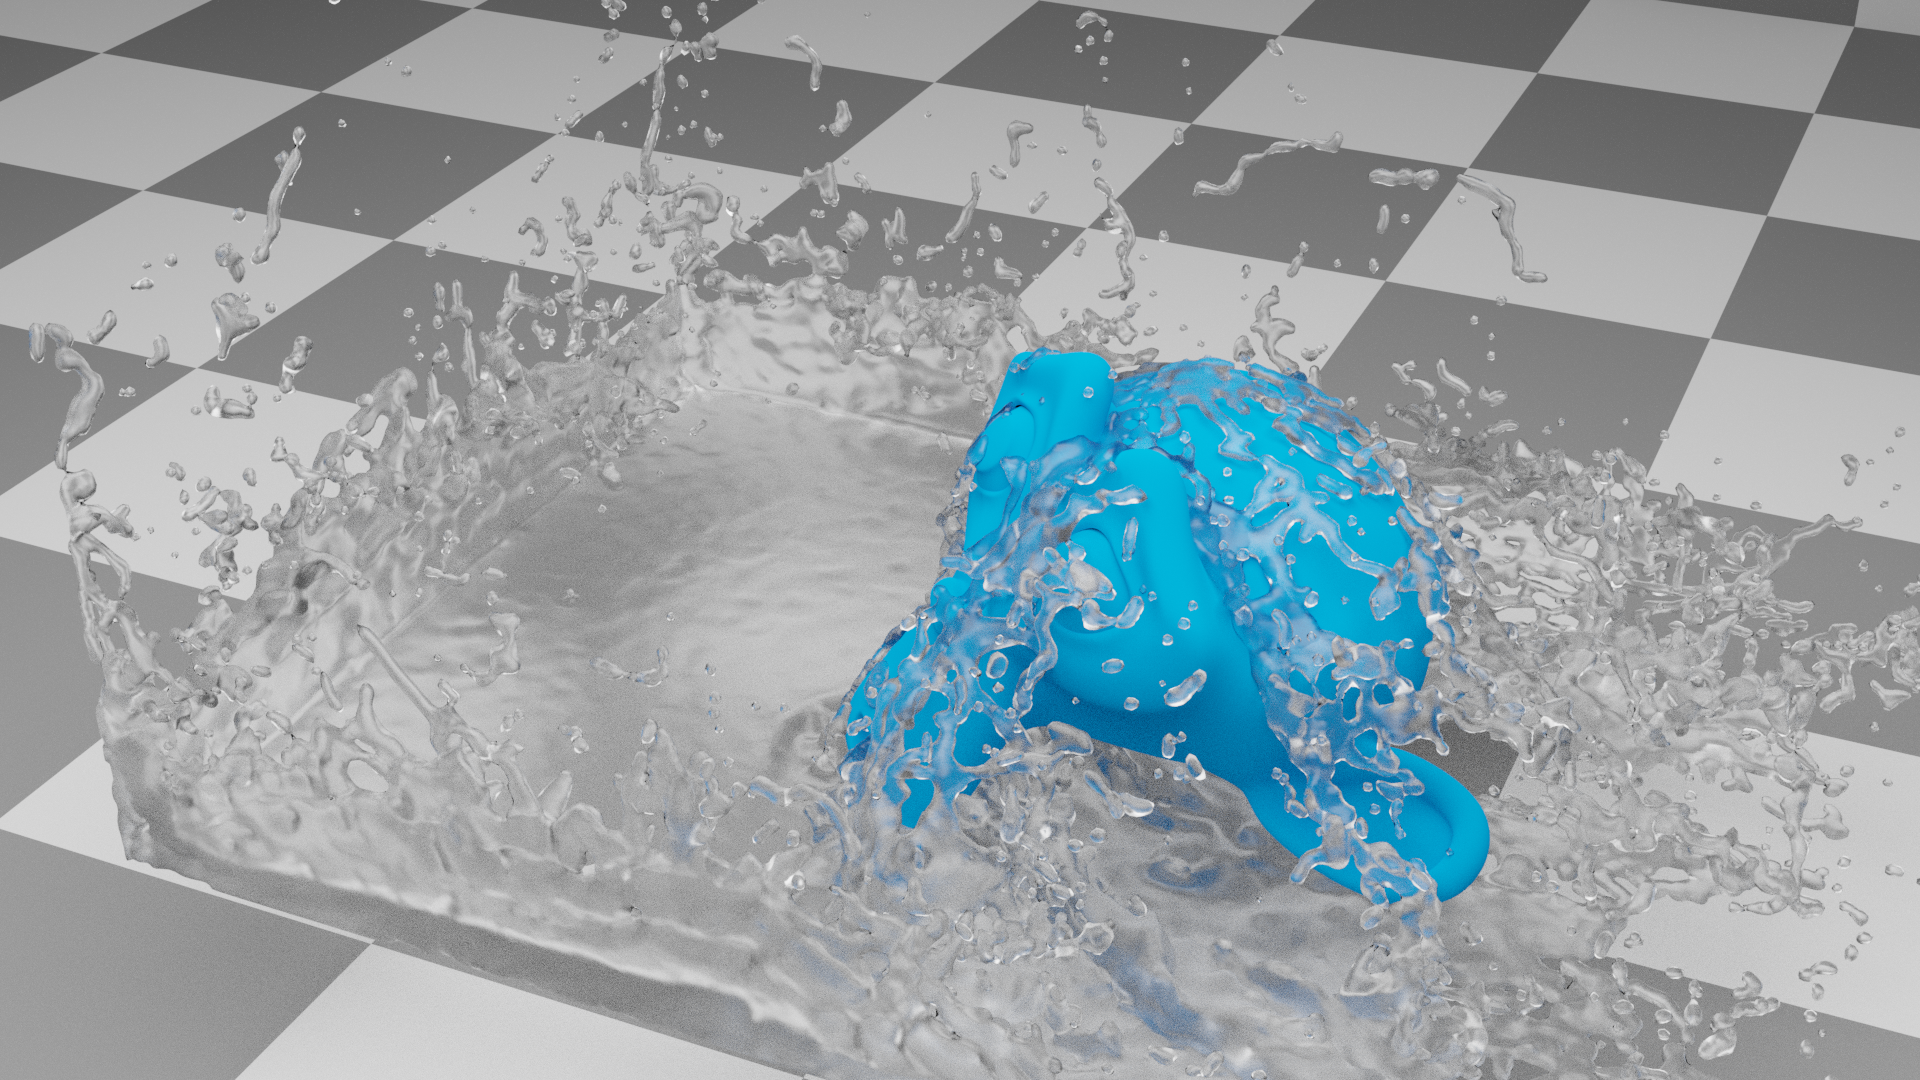 https://projects.blender.org/blender/blender-manual/media/branch/main/manual/images/physics_fluid_introduction_liquid-example.png